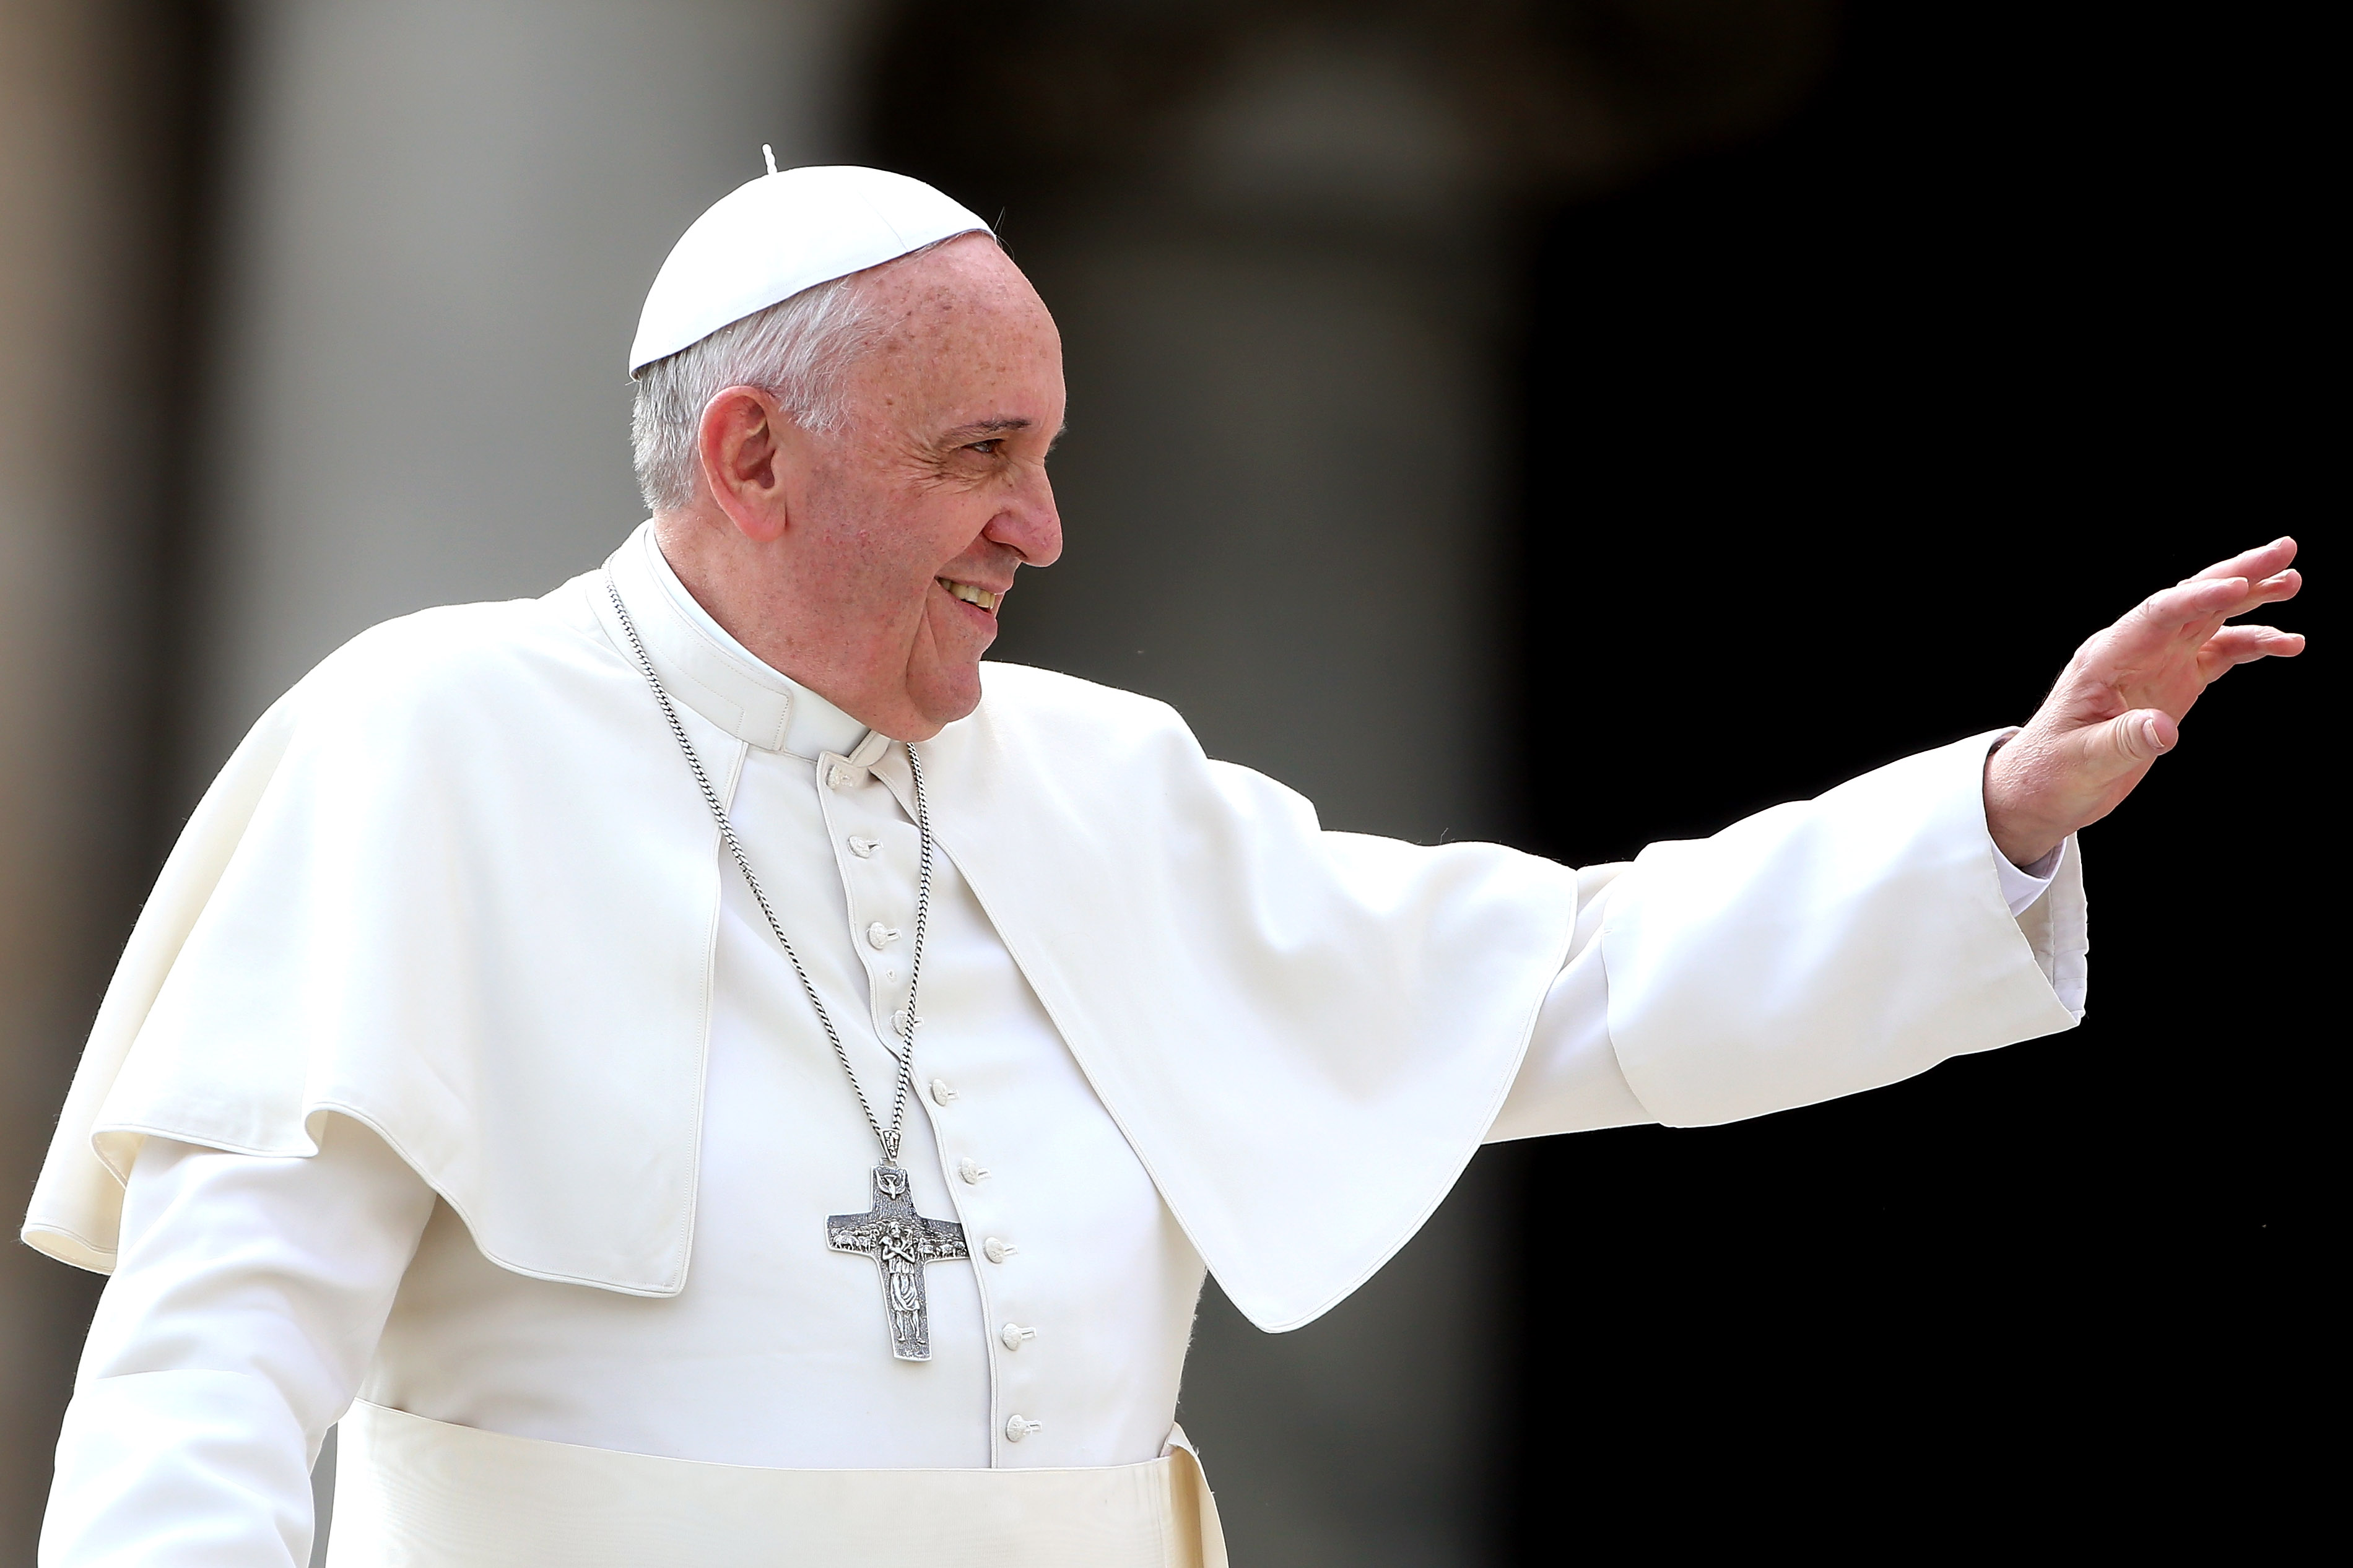 Pope Francis imposes austerity, Vatican officials complain of socialism